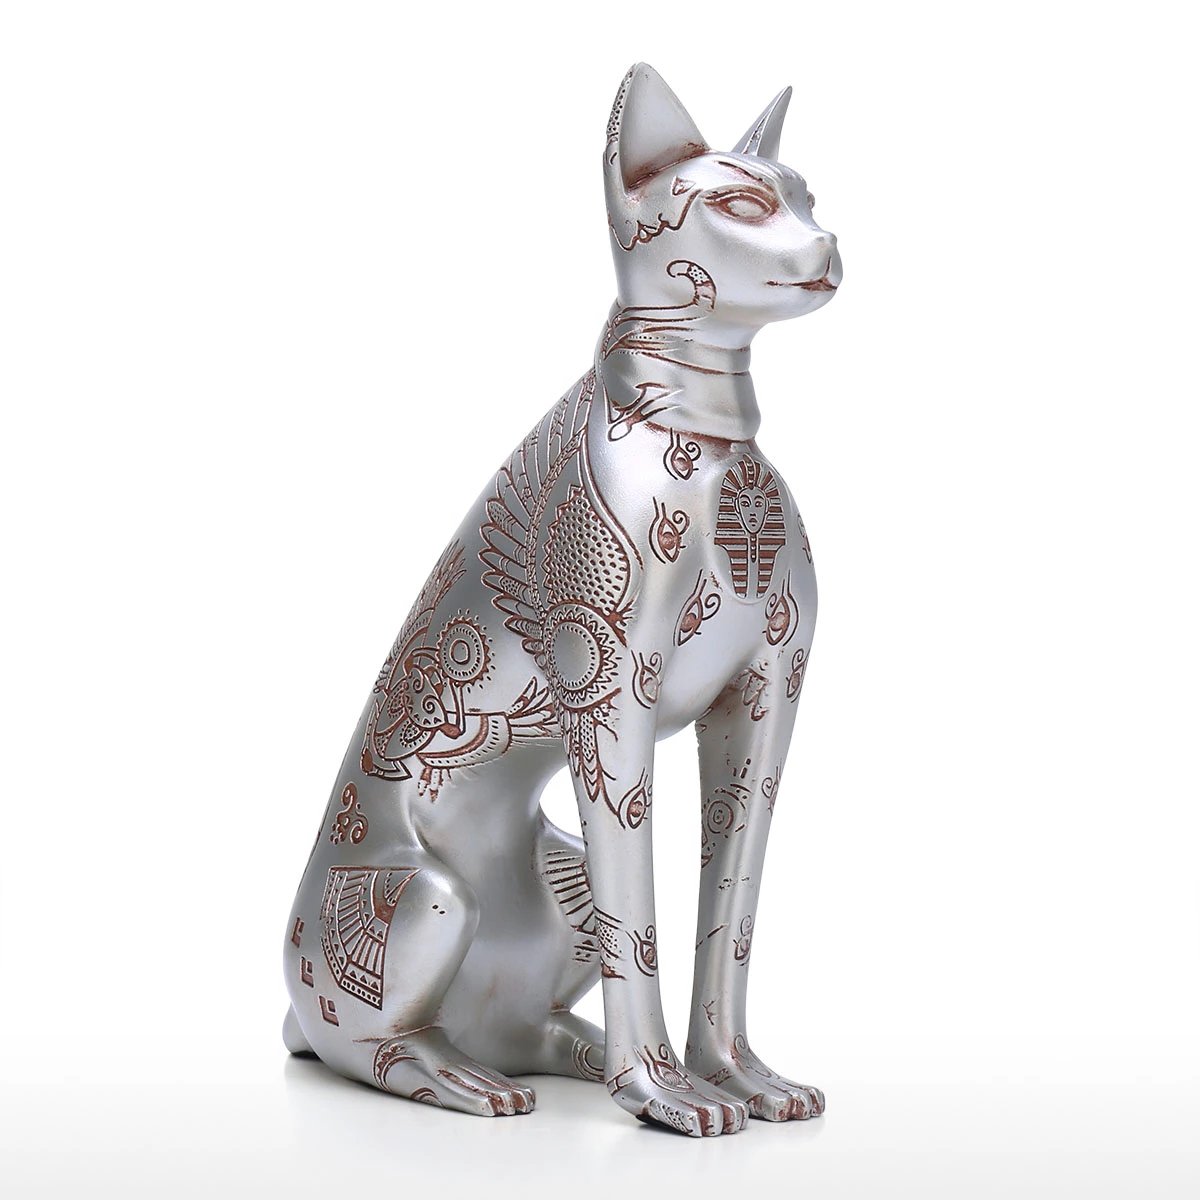 Egyptian Cat Statue For Gifts & Ornament Decor by Great Sphinx of Giza